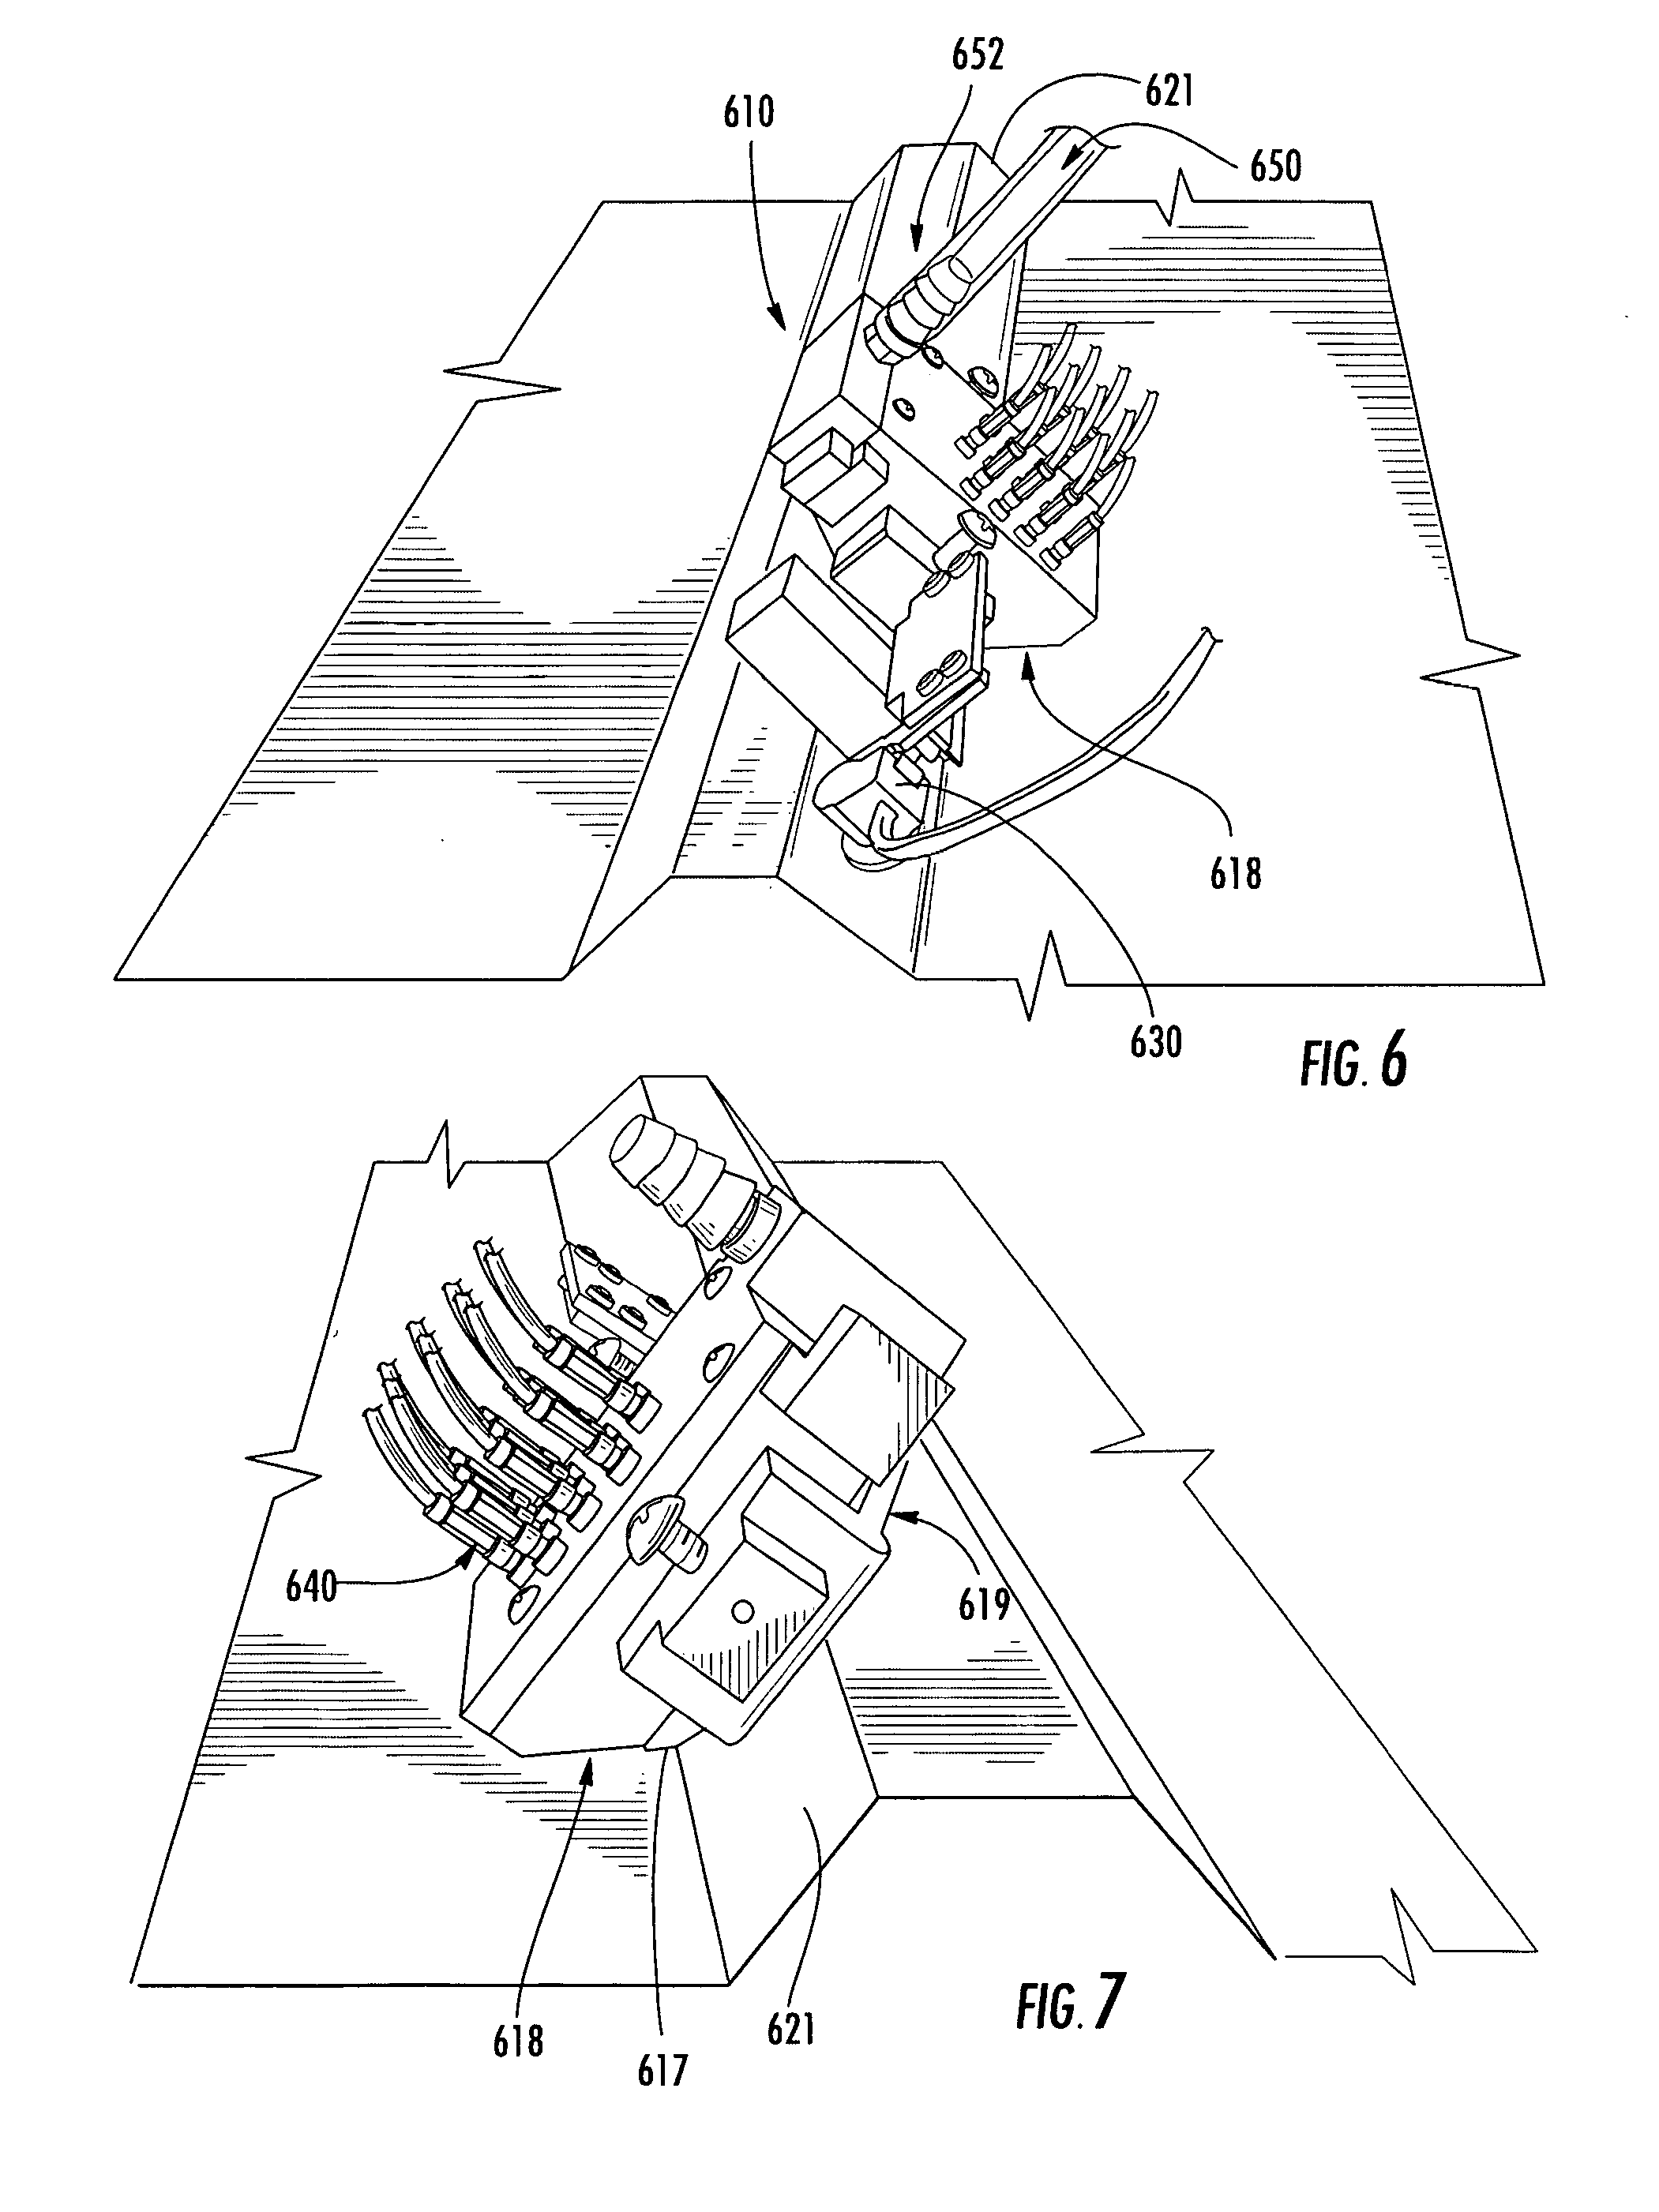 Rapid prototype integrated matrix ultrasonic transducer array inspection apparatus, systems, and methods